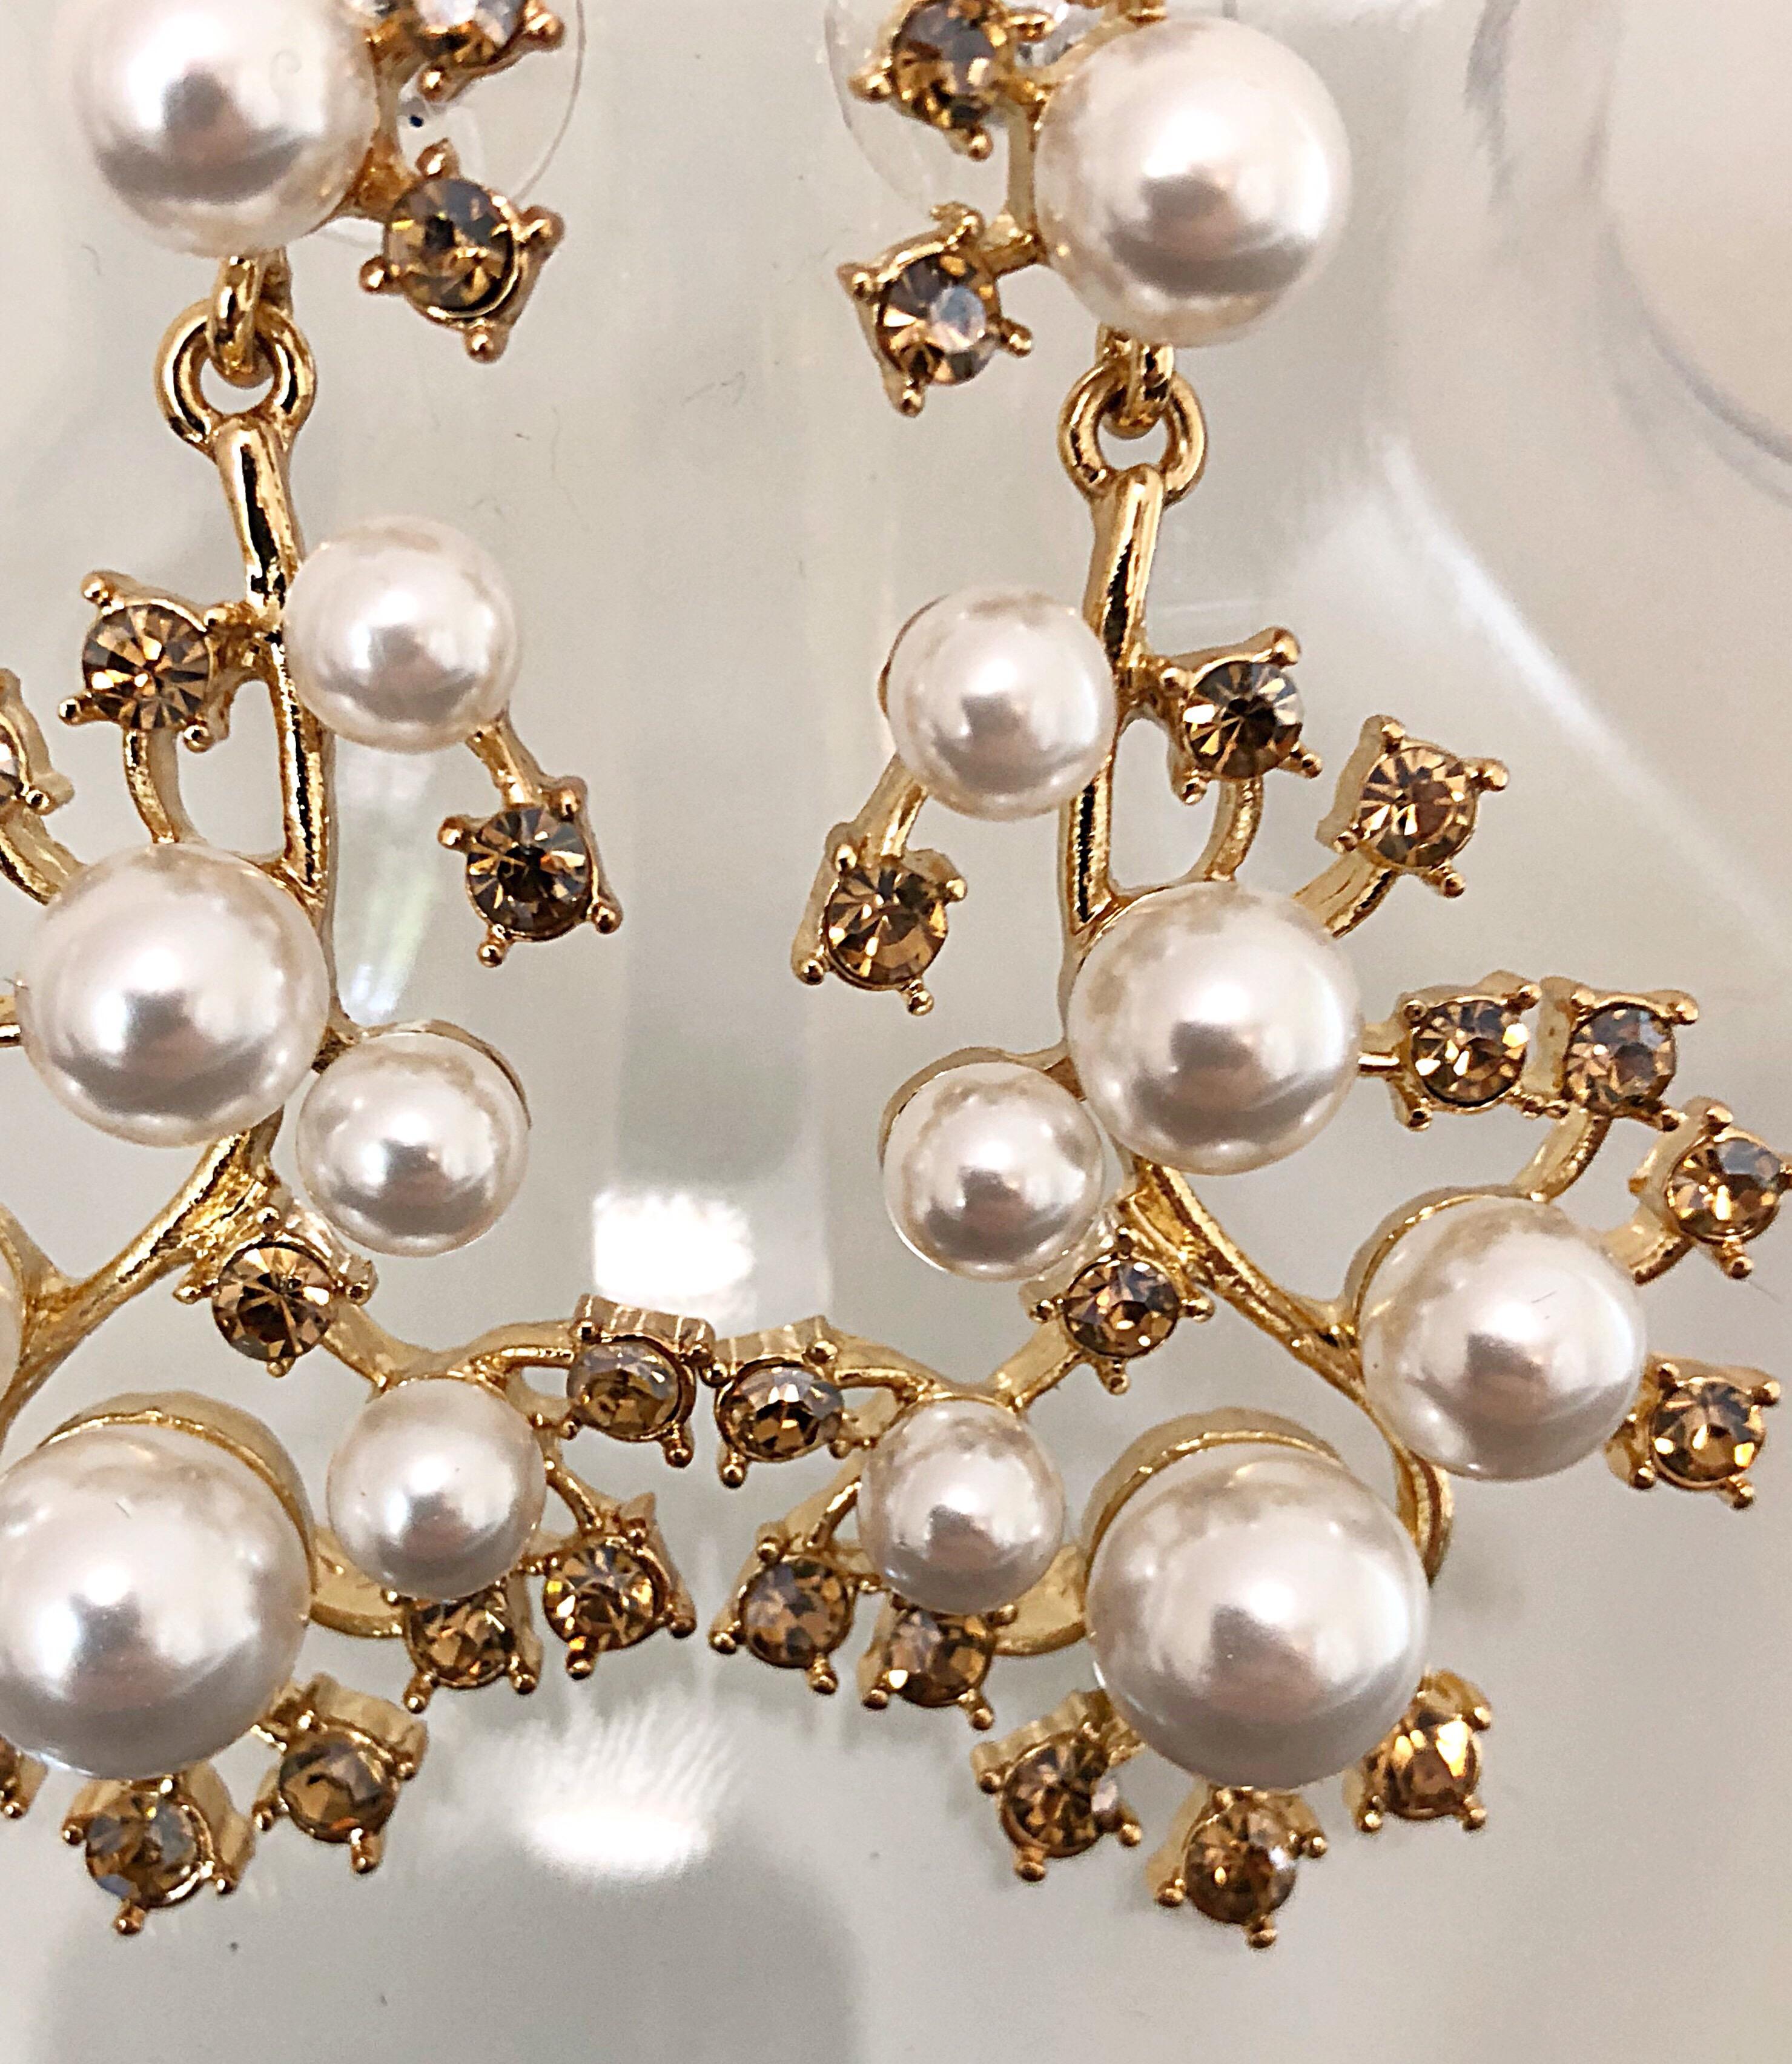 Beautiful new vintage large OSCAR DE LA RENTA gold pearl and rhinestone chandelier earrings! Features seven white pearls in various shapes on each earring, along with 15 gold rhinestones on each. Pierced back, and not heavy. The perfect accessory to